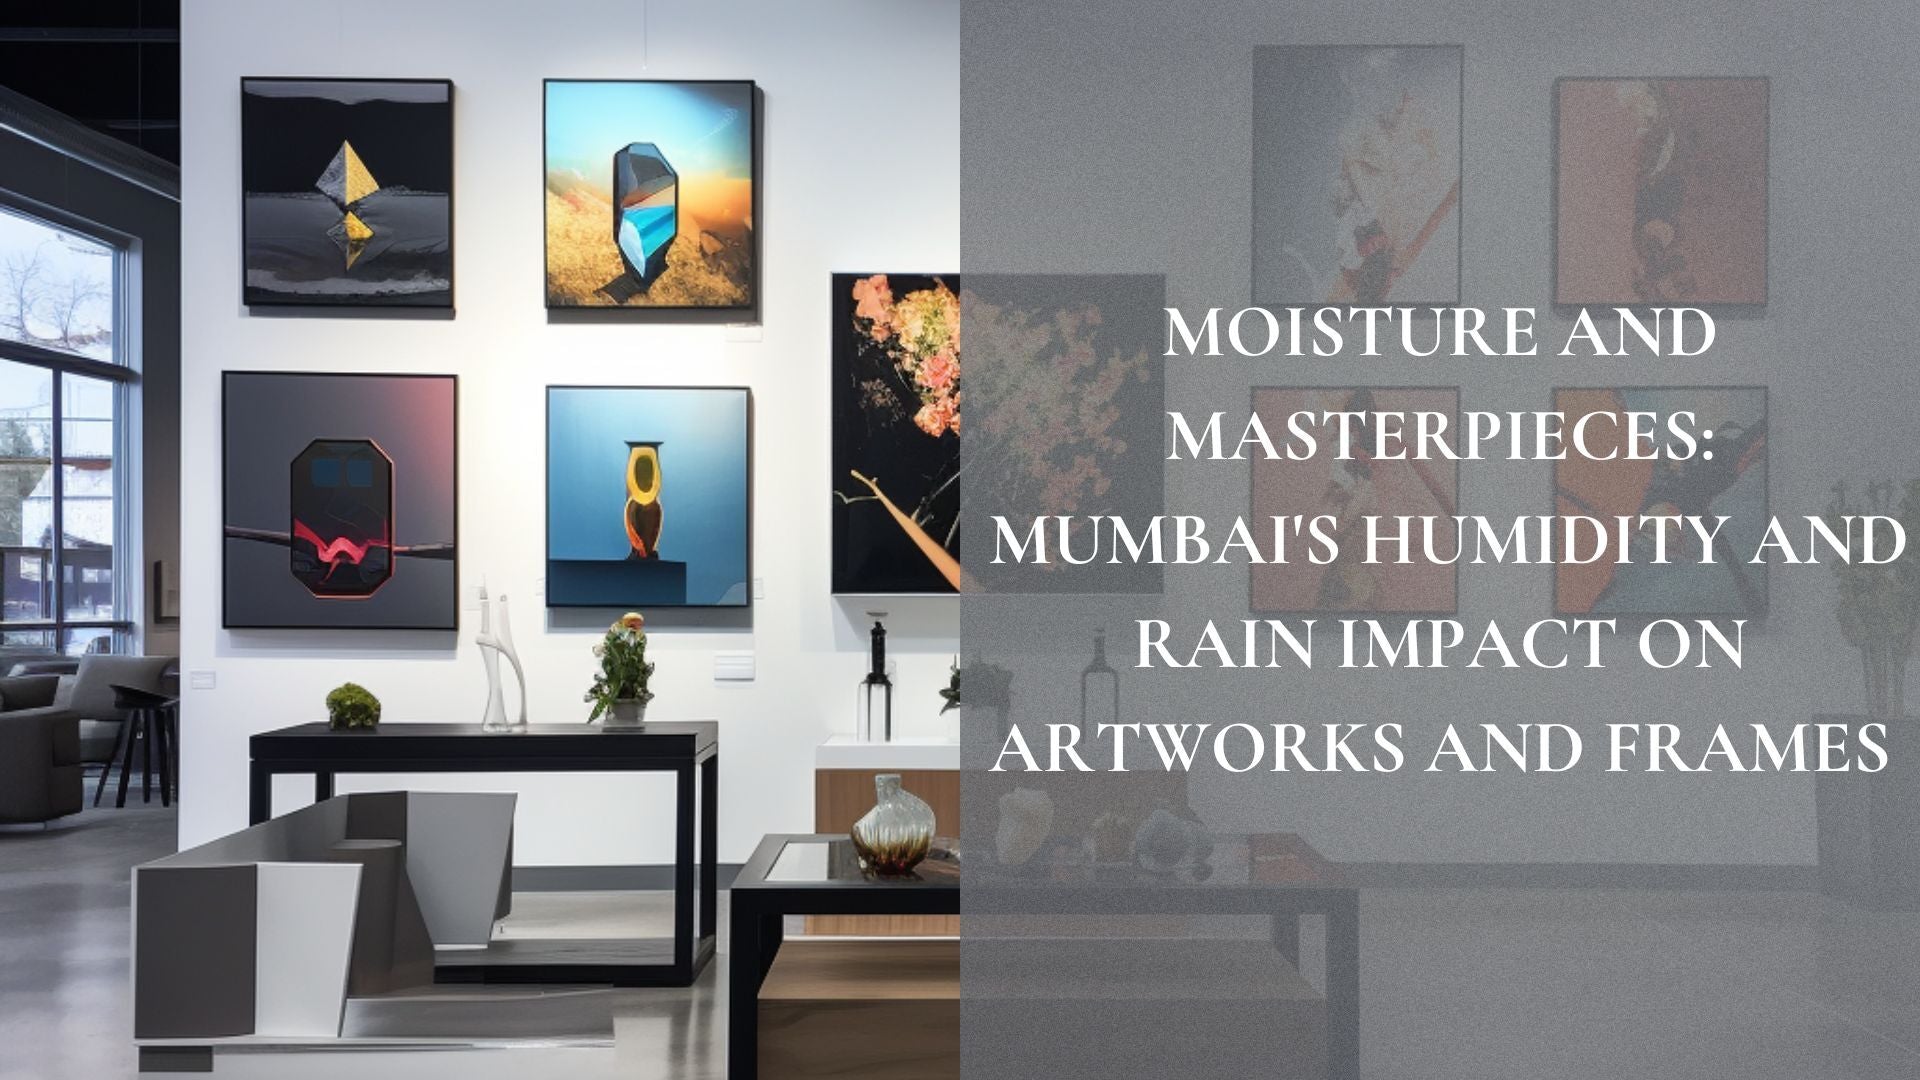 Moisture and Masterpieces: Mumbai's Humidity and Rain Impact on Artworks and Frames